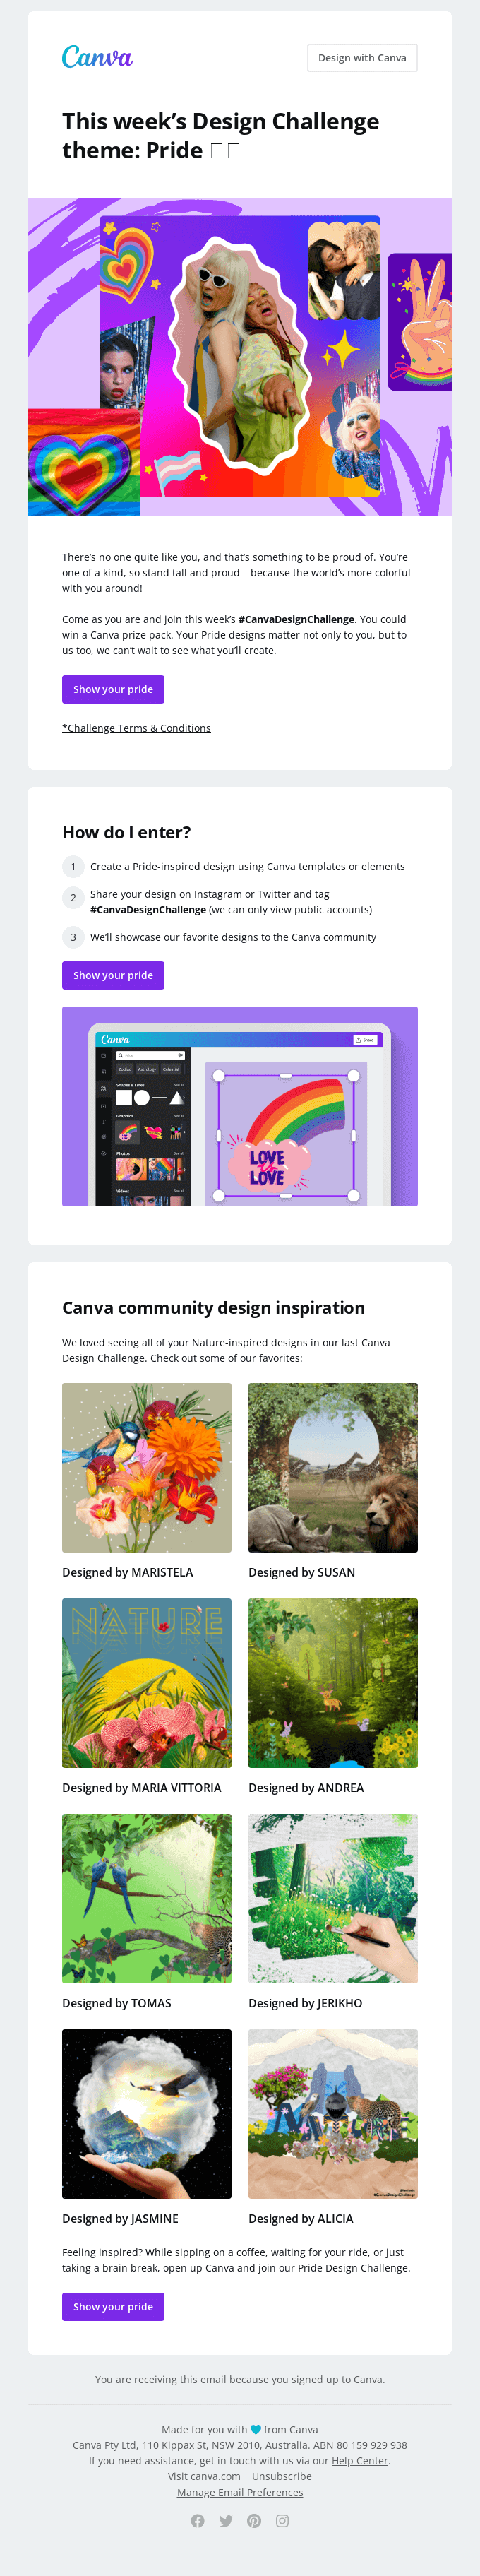 Say it loud, say it proud 🏳️‍🌈 #CanvaDesignChallenge - Canva Email Newsletter